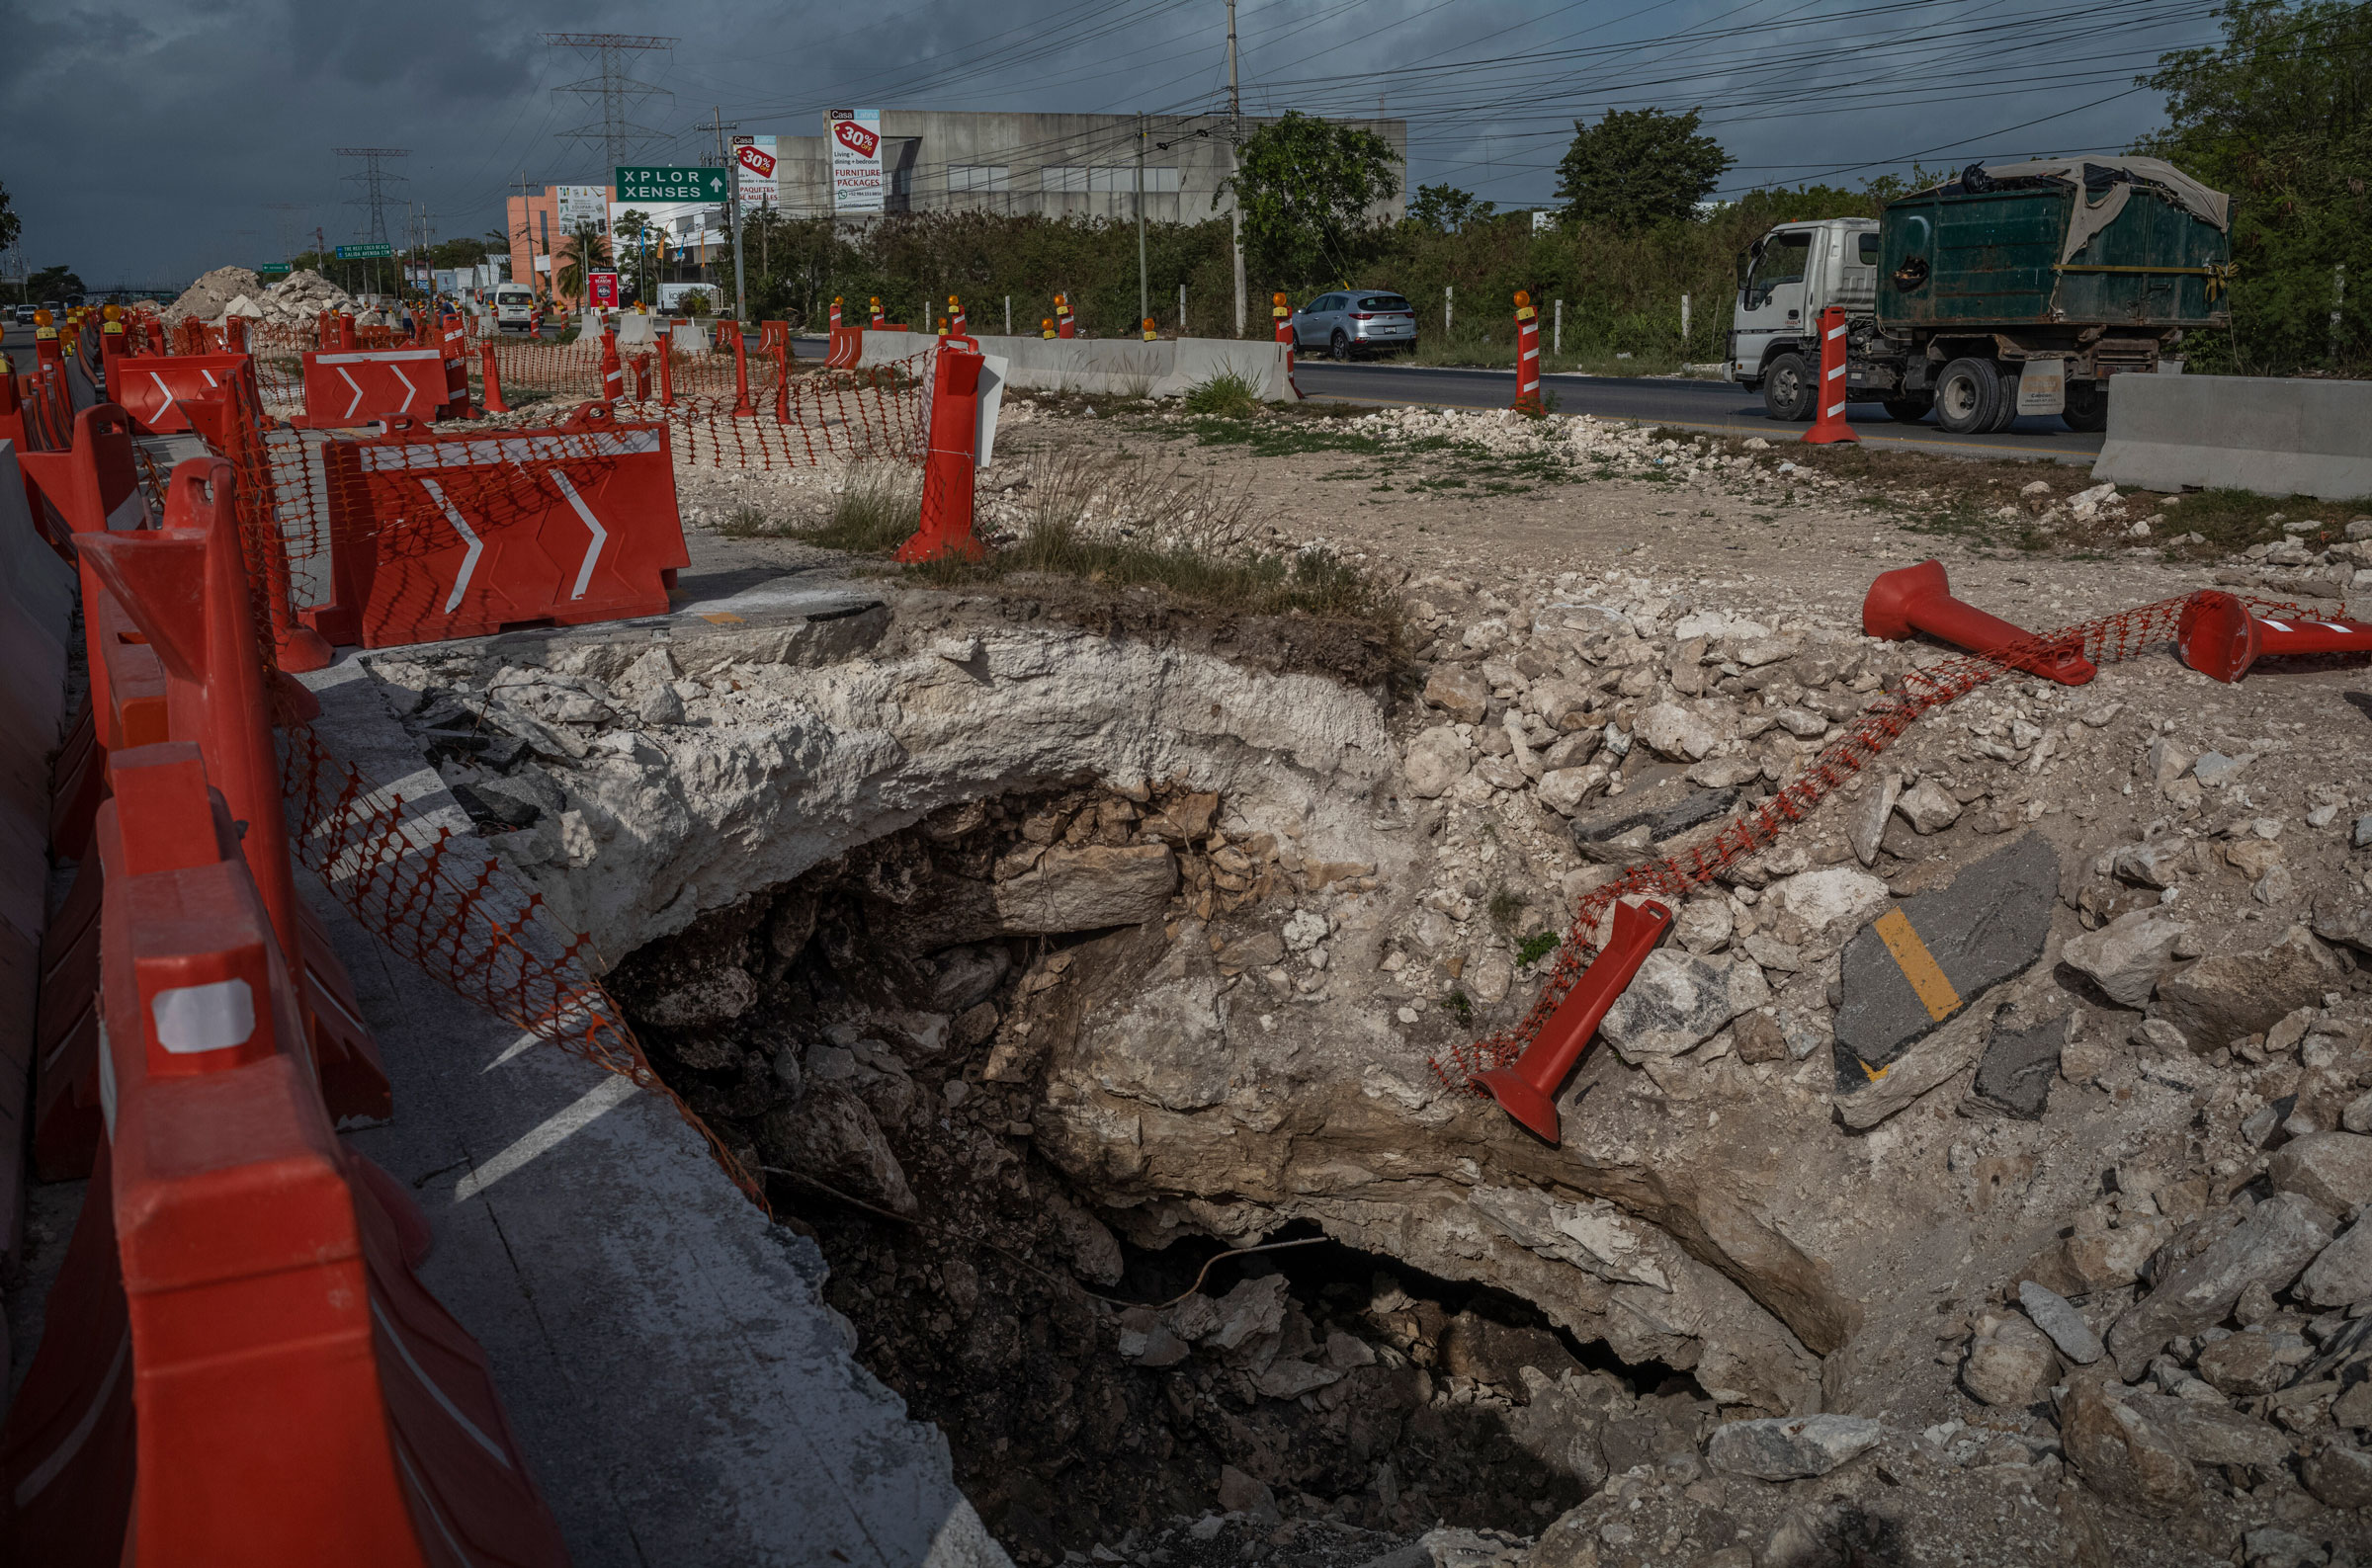 A landslide at a construction site for the Mayan Train, before the route was changed to travel through the jungle, in Playa del Carmen, Mexico on May 26, 2022. (Alejandro Cegarra—The New York Times/Redux)